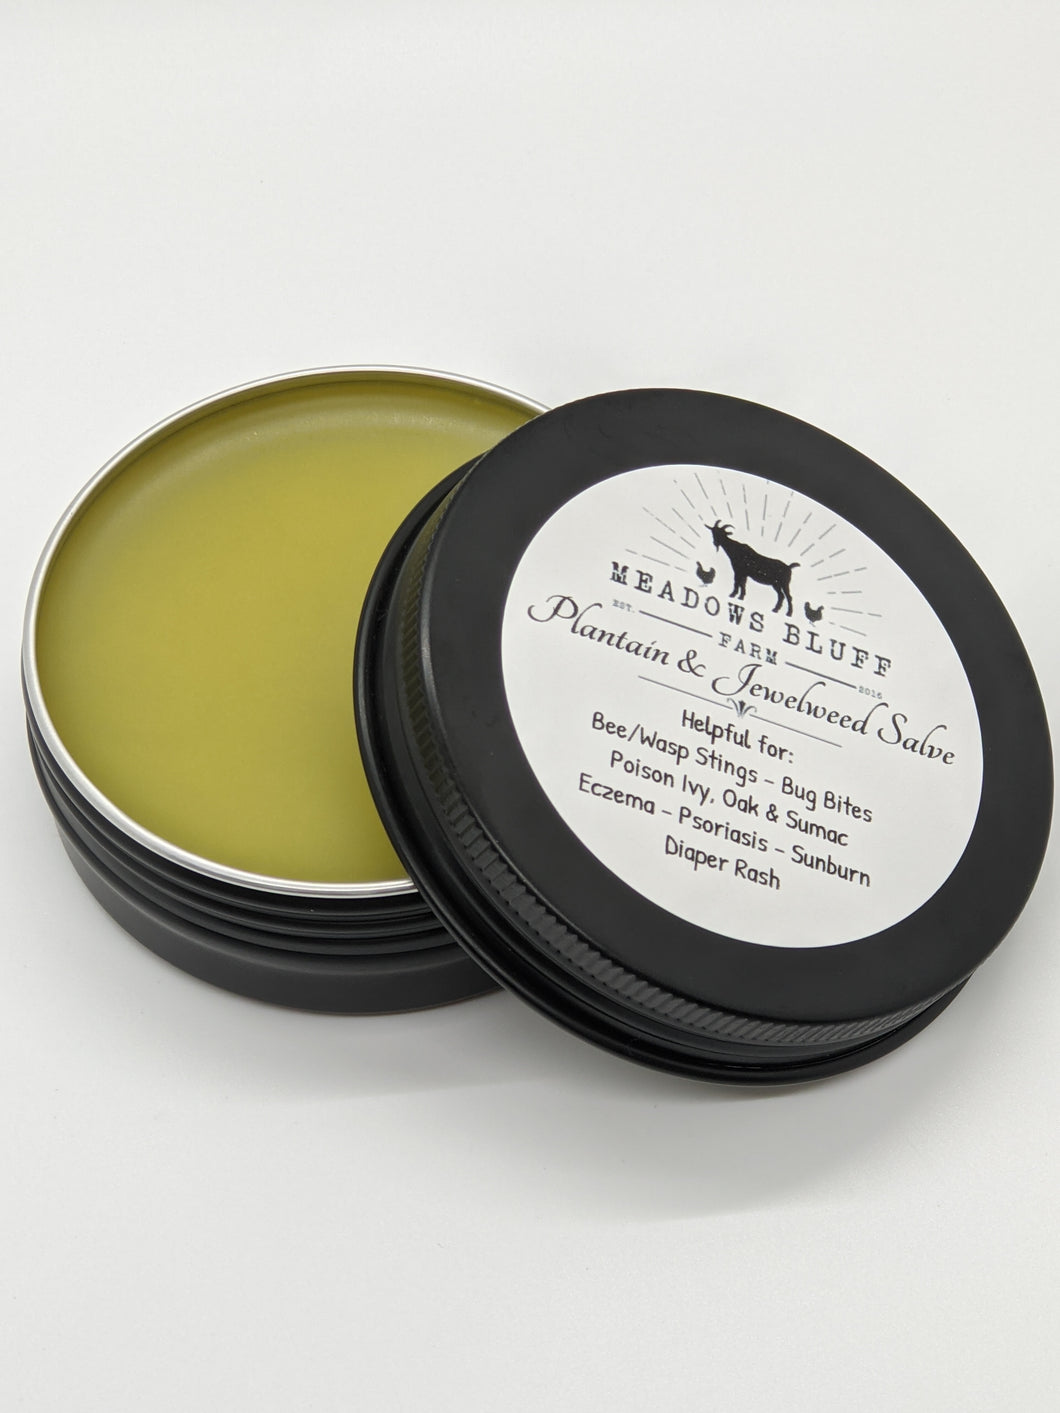 Plantain and Jewelweed Salve